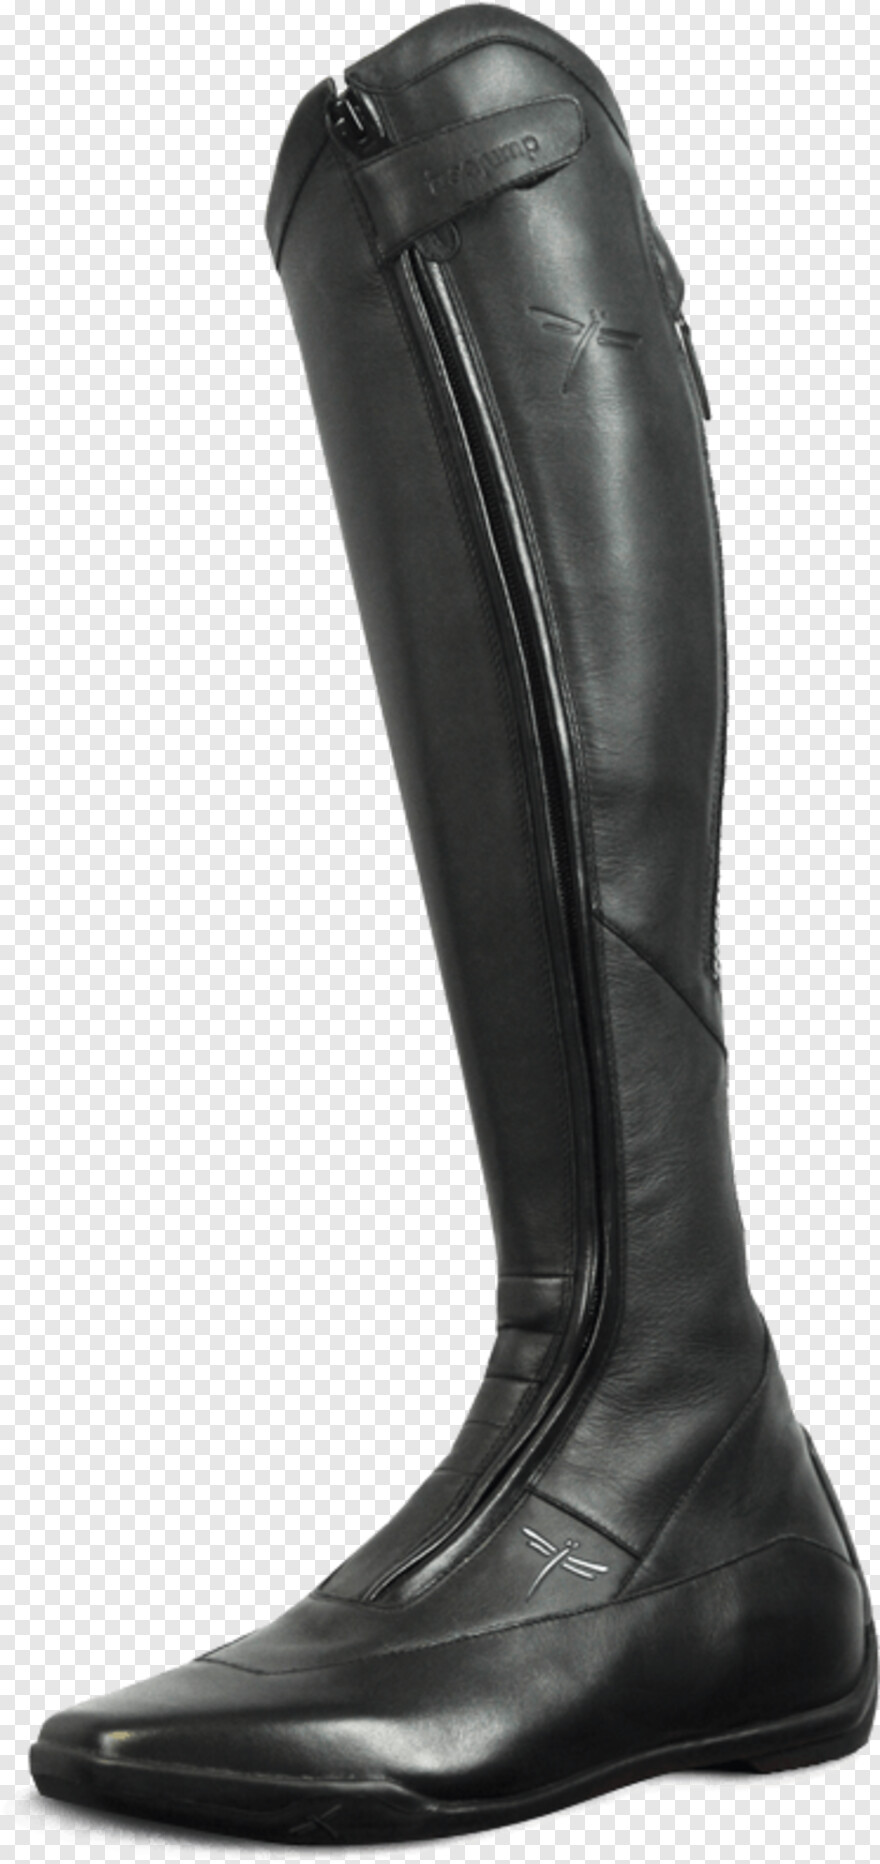 boots # 330622